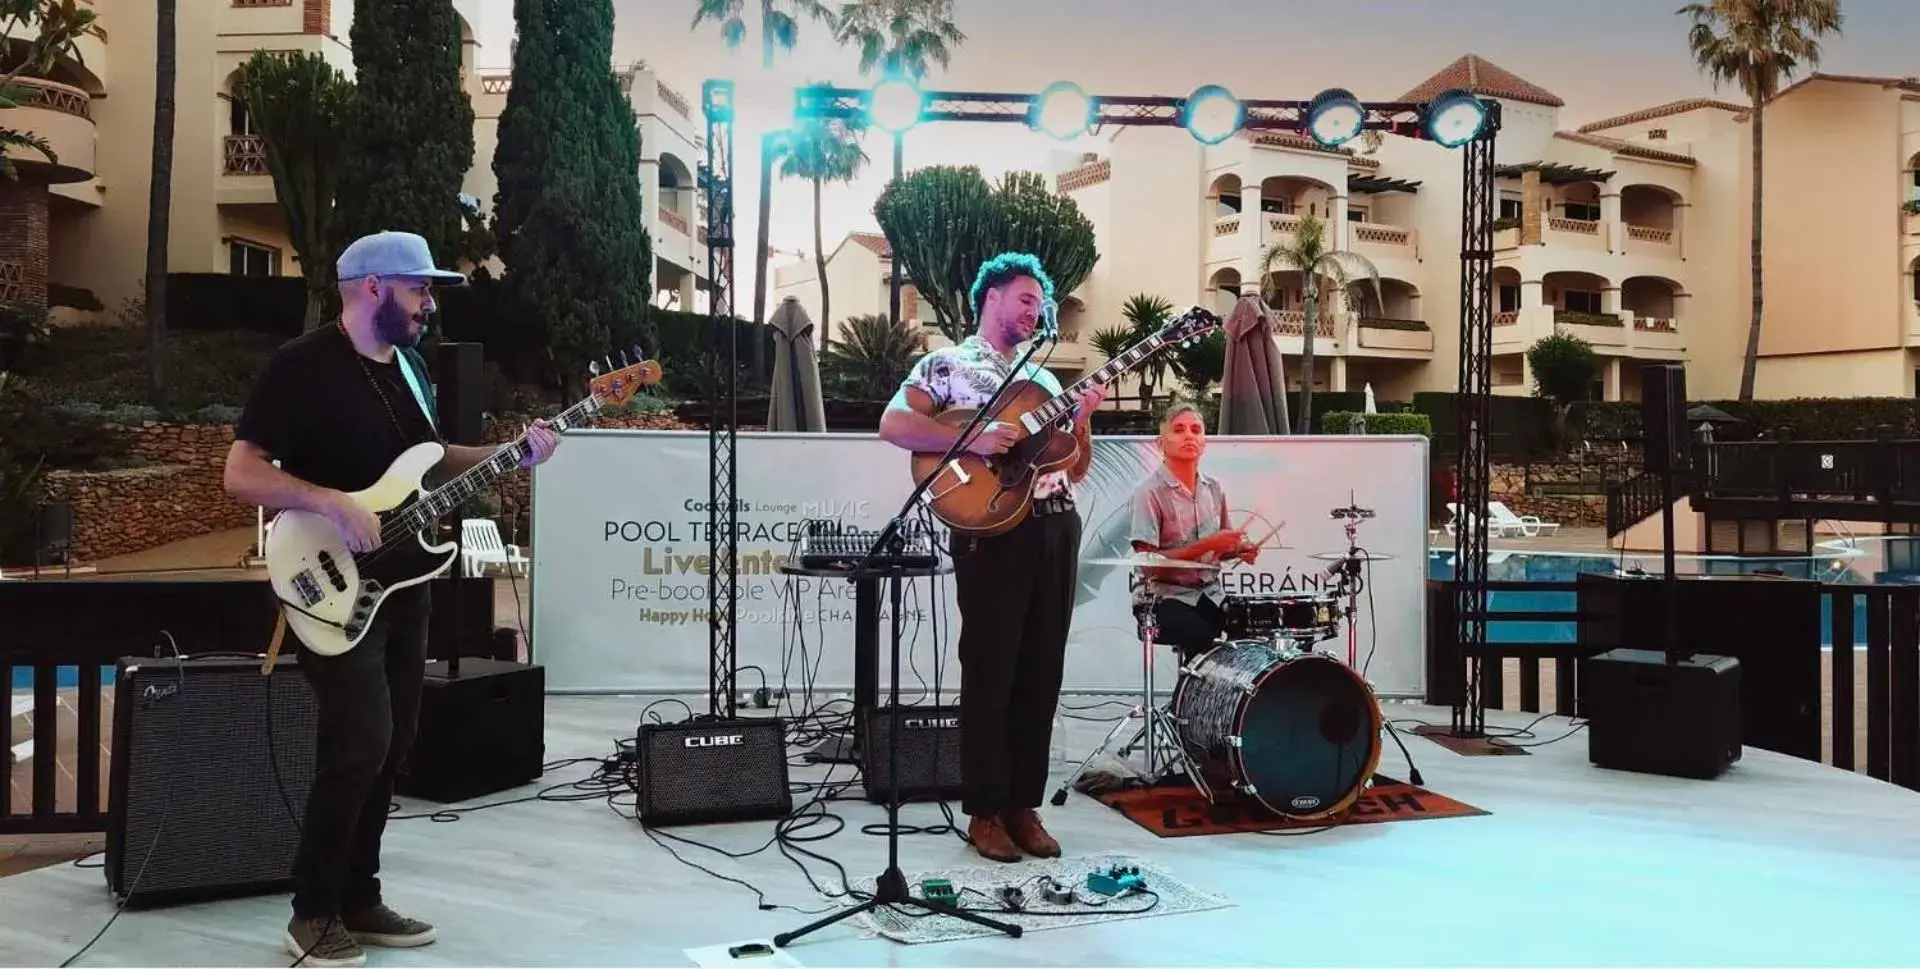 Evening entertainment, Other Activities in Wyndham Grand Residences Costa del Sol